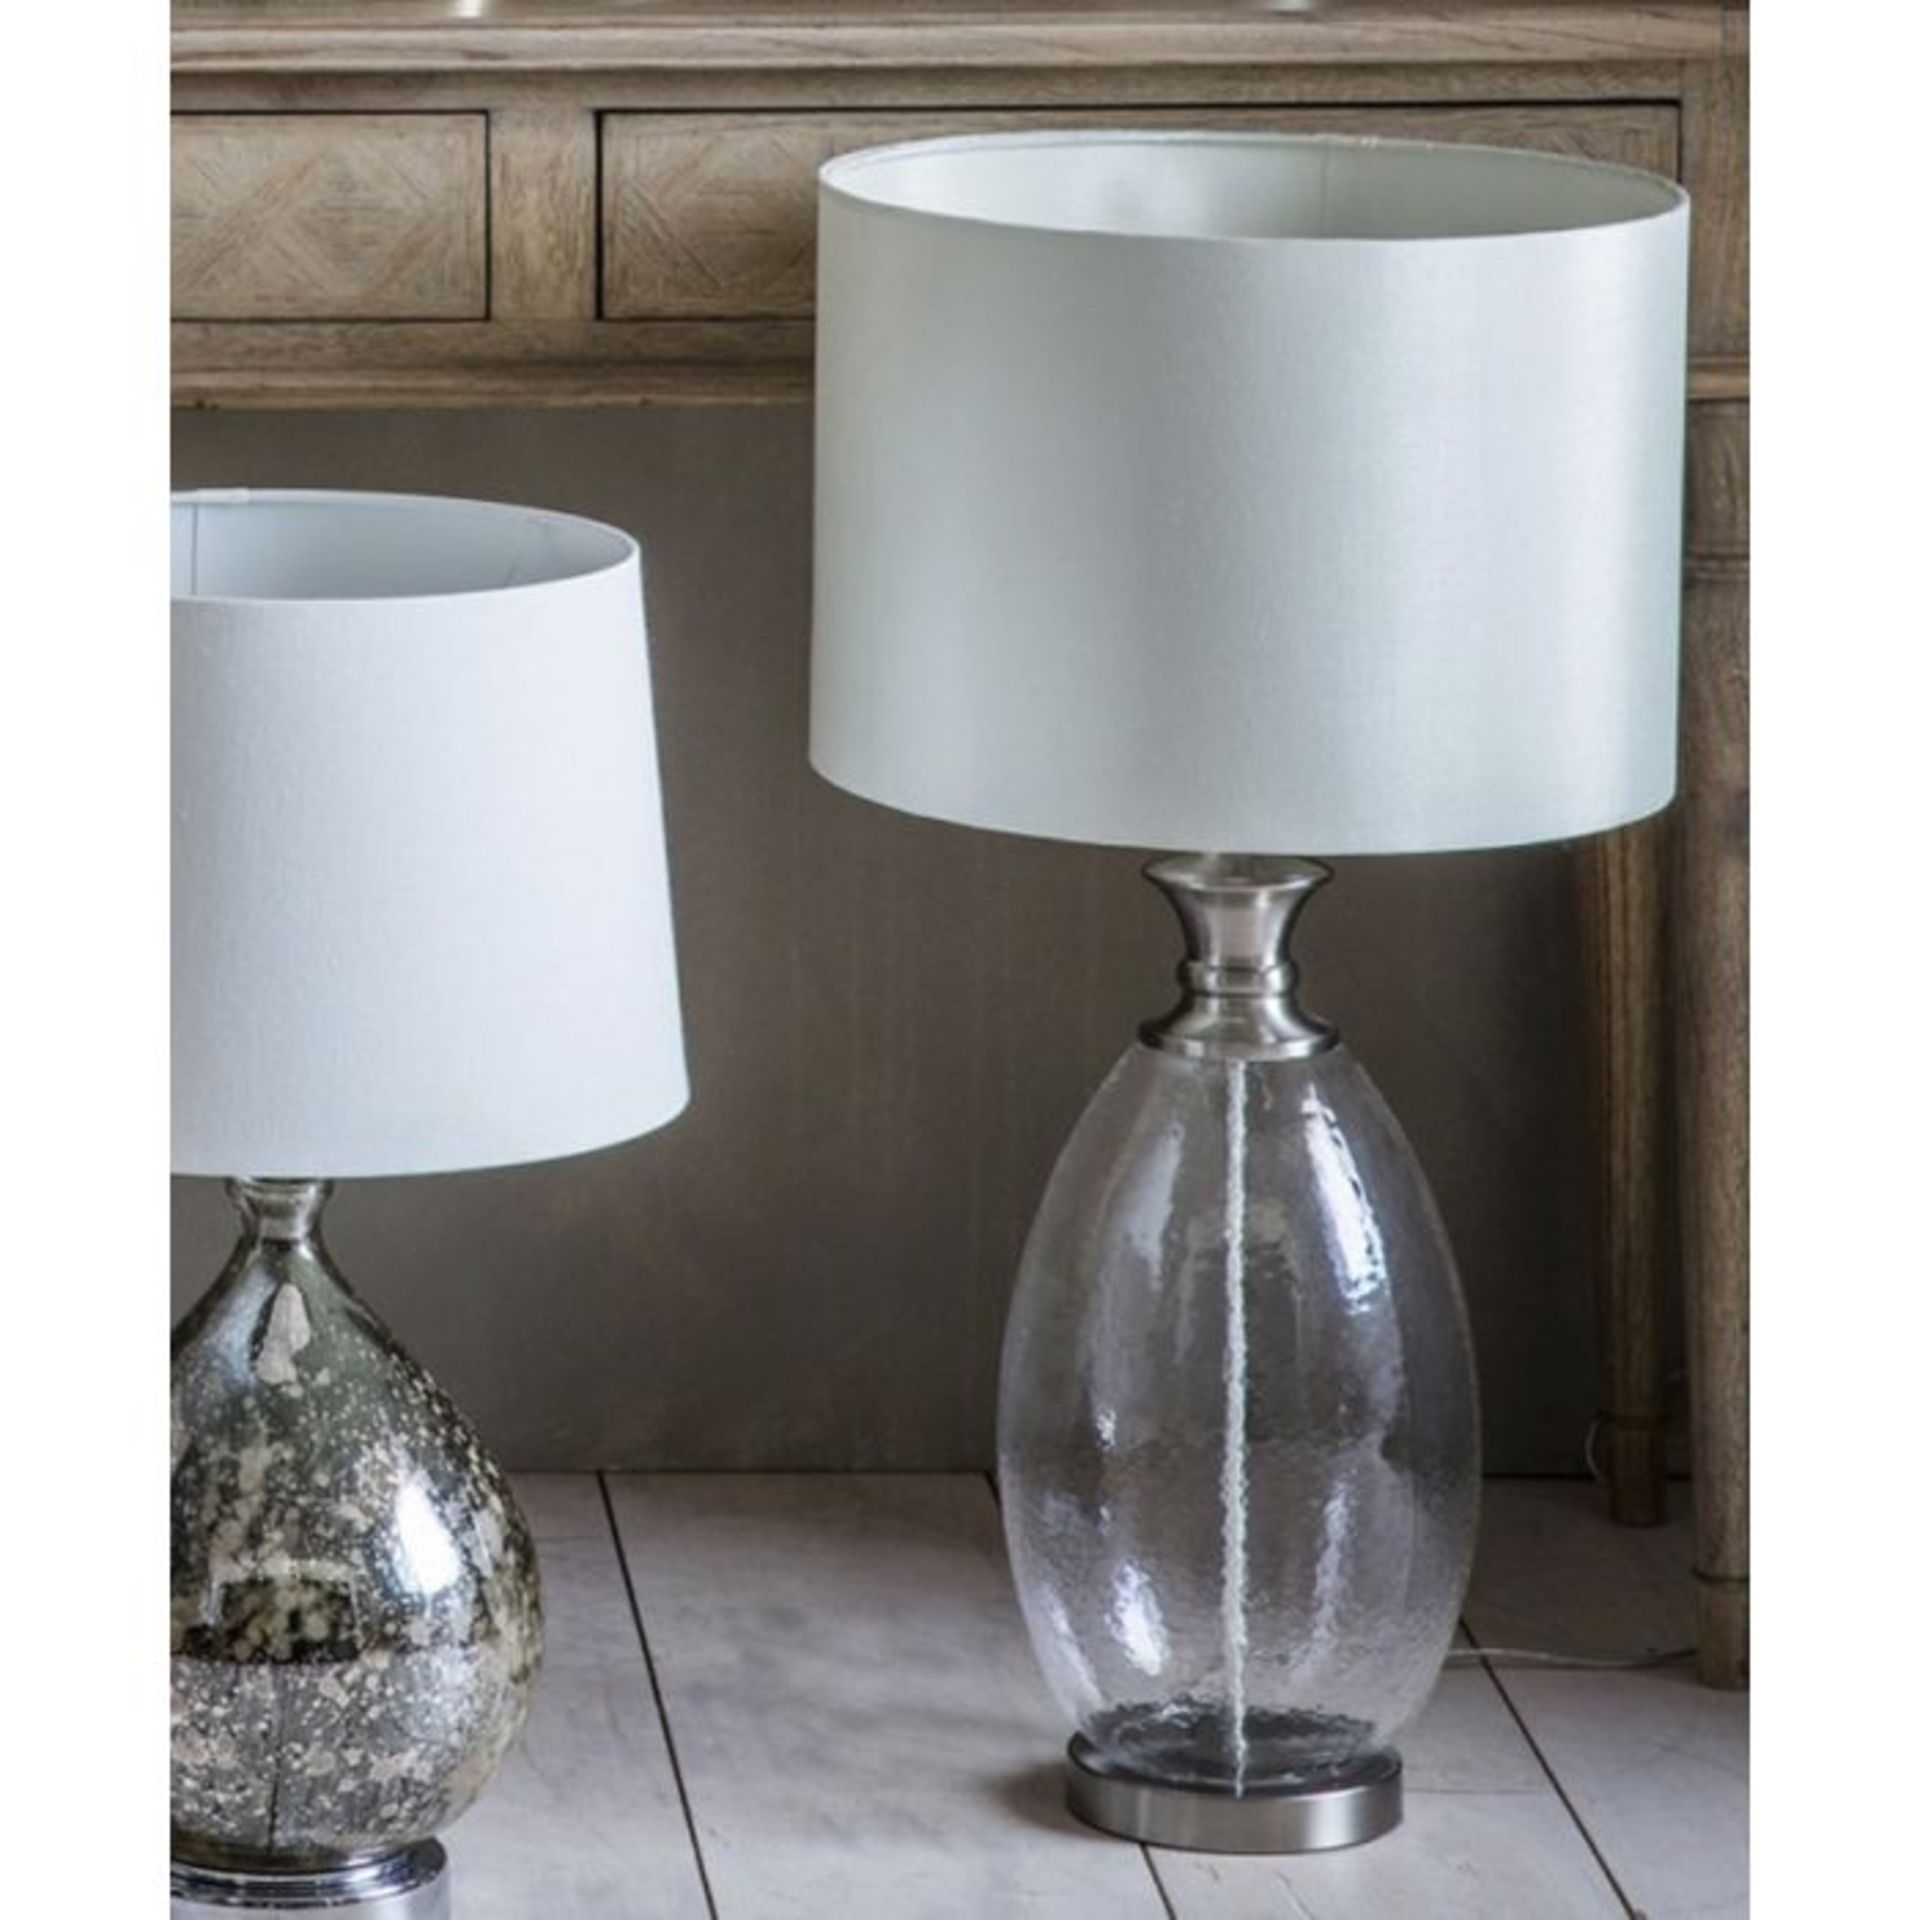 A pair of Sulgrave Table Lamps Modernise Your Home By Welcoming This Absolutely Stunning Table